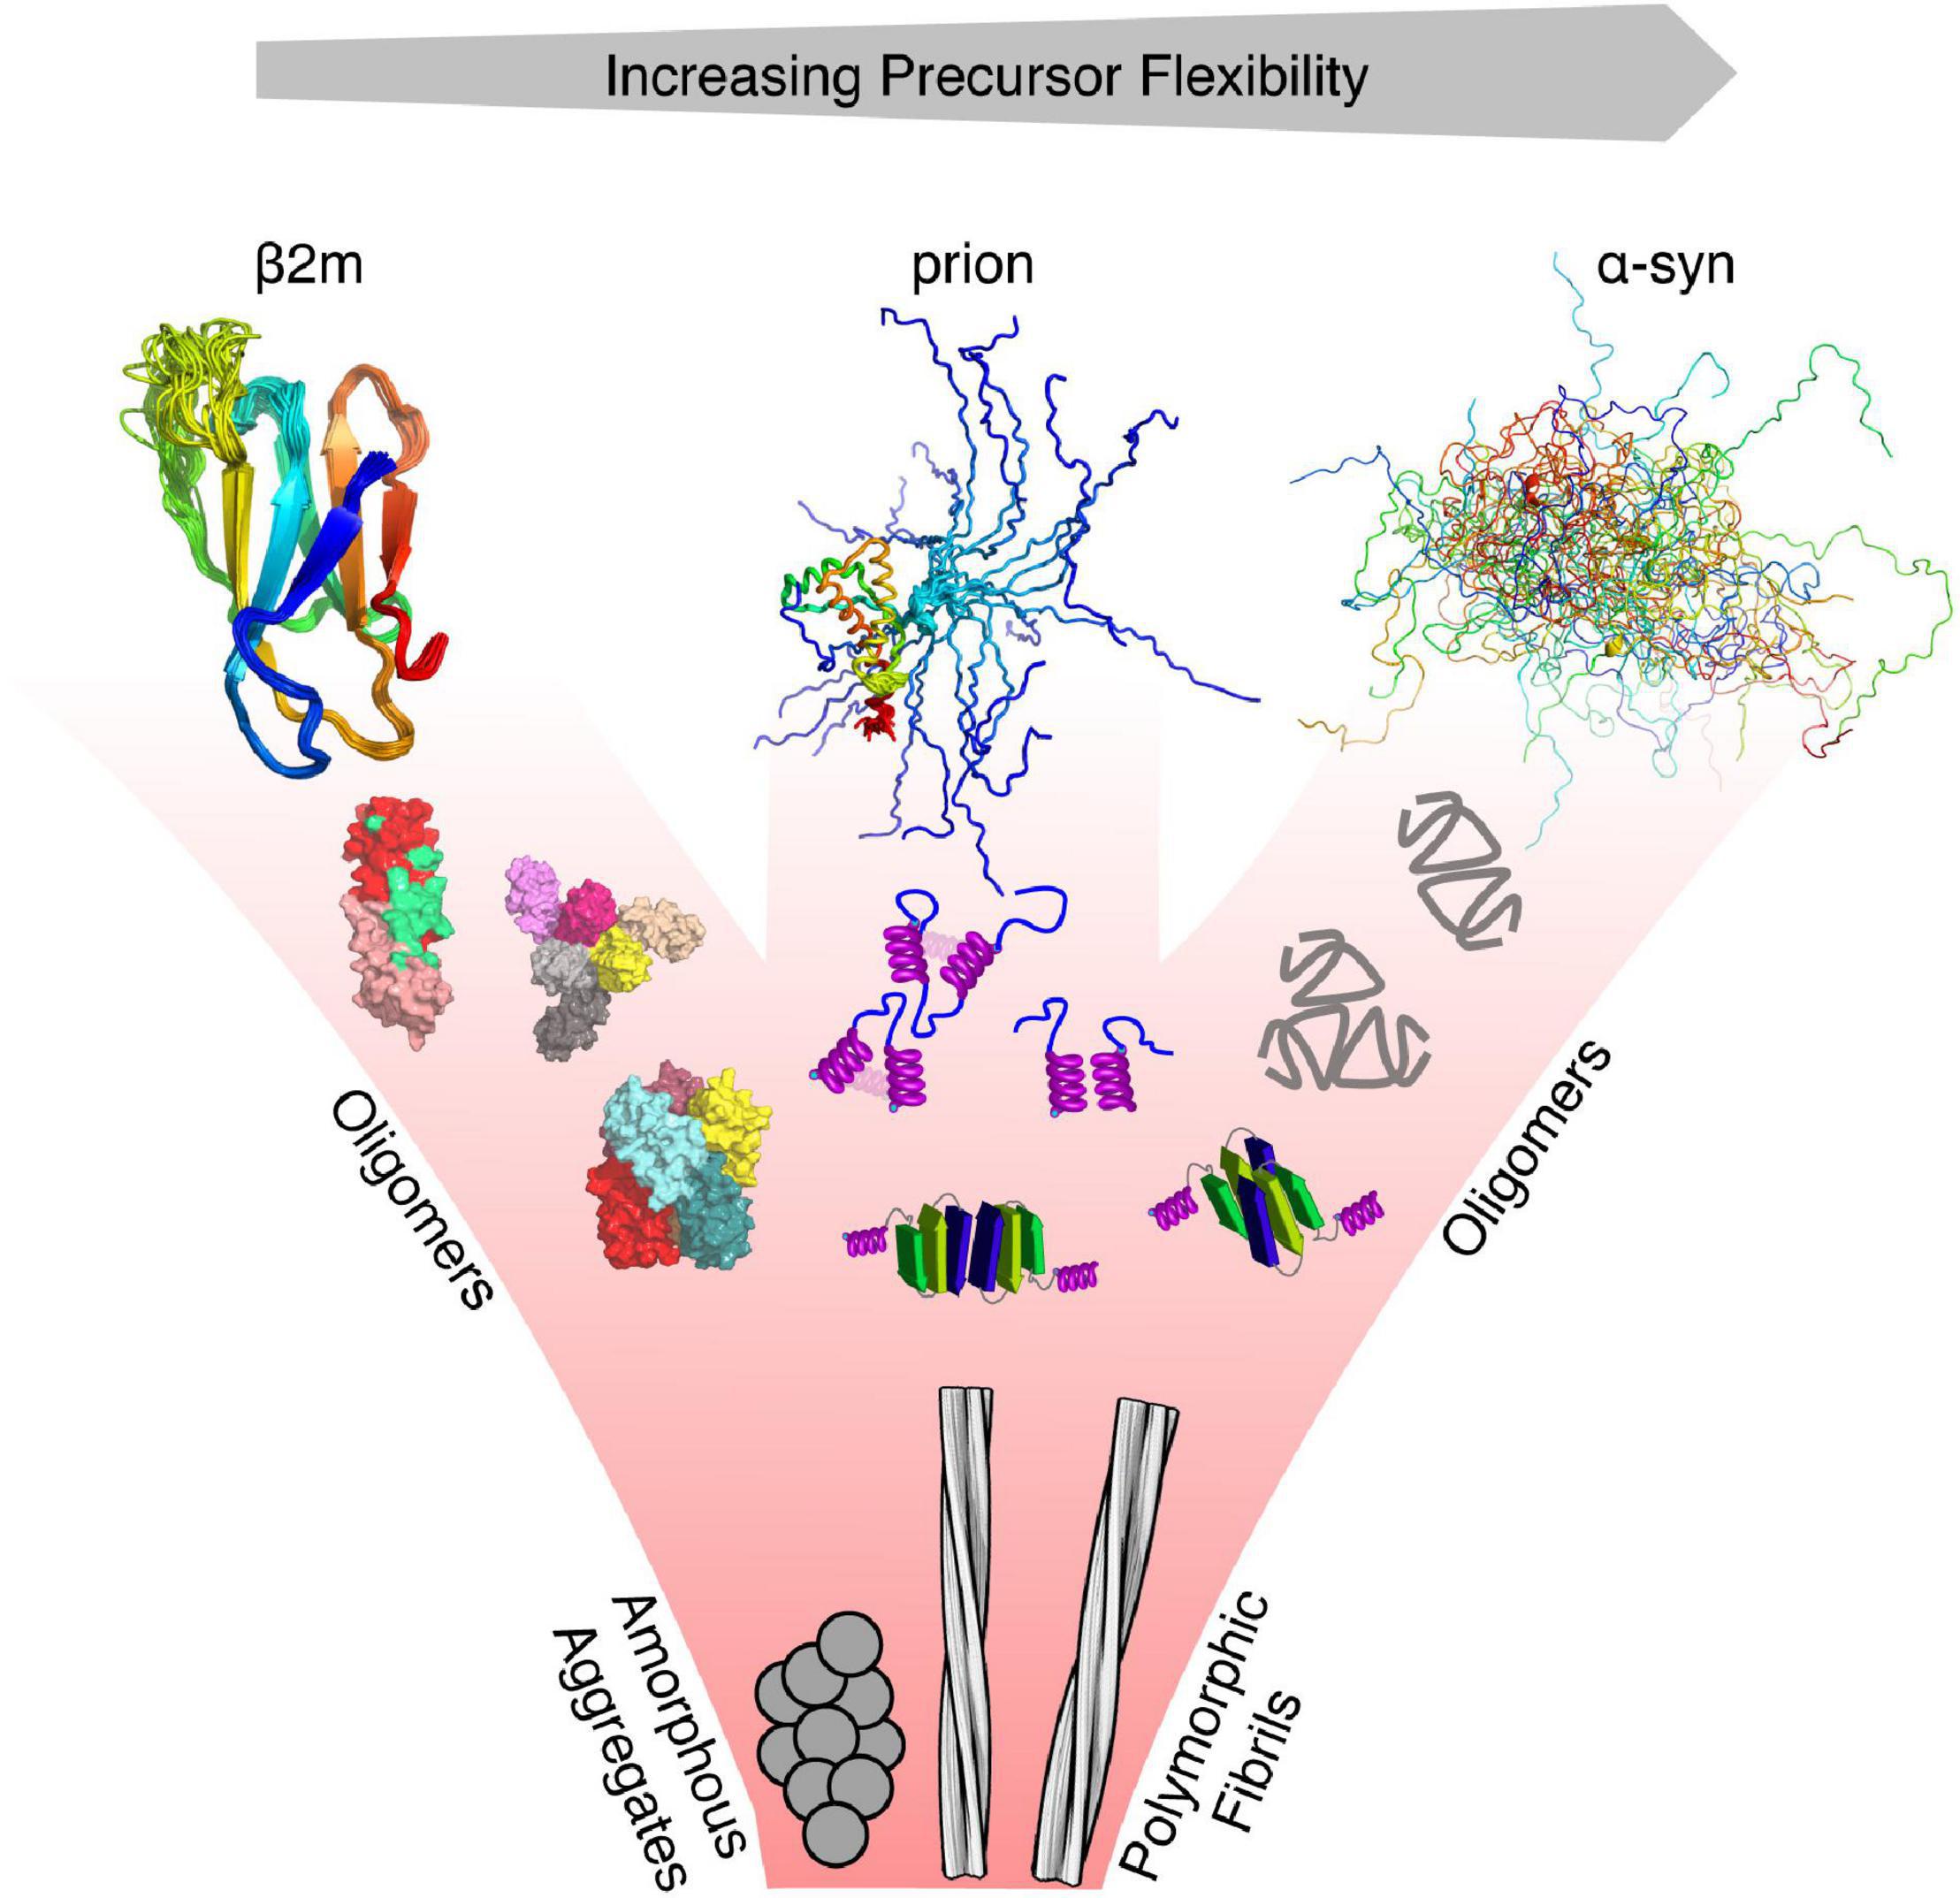 Frontiers  General Principles Underpinning Amyloid Structure